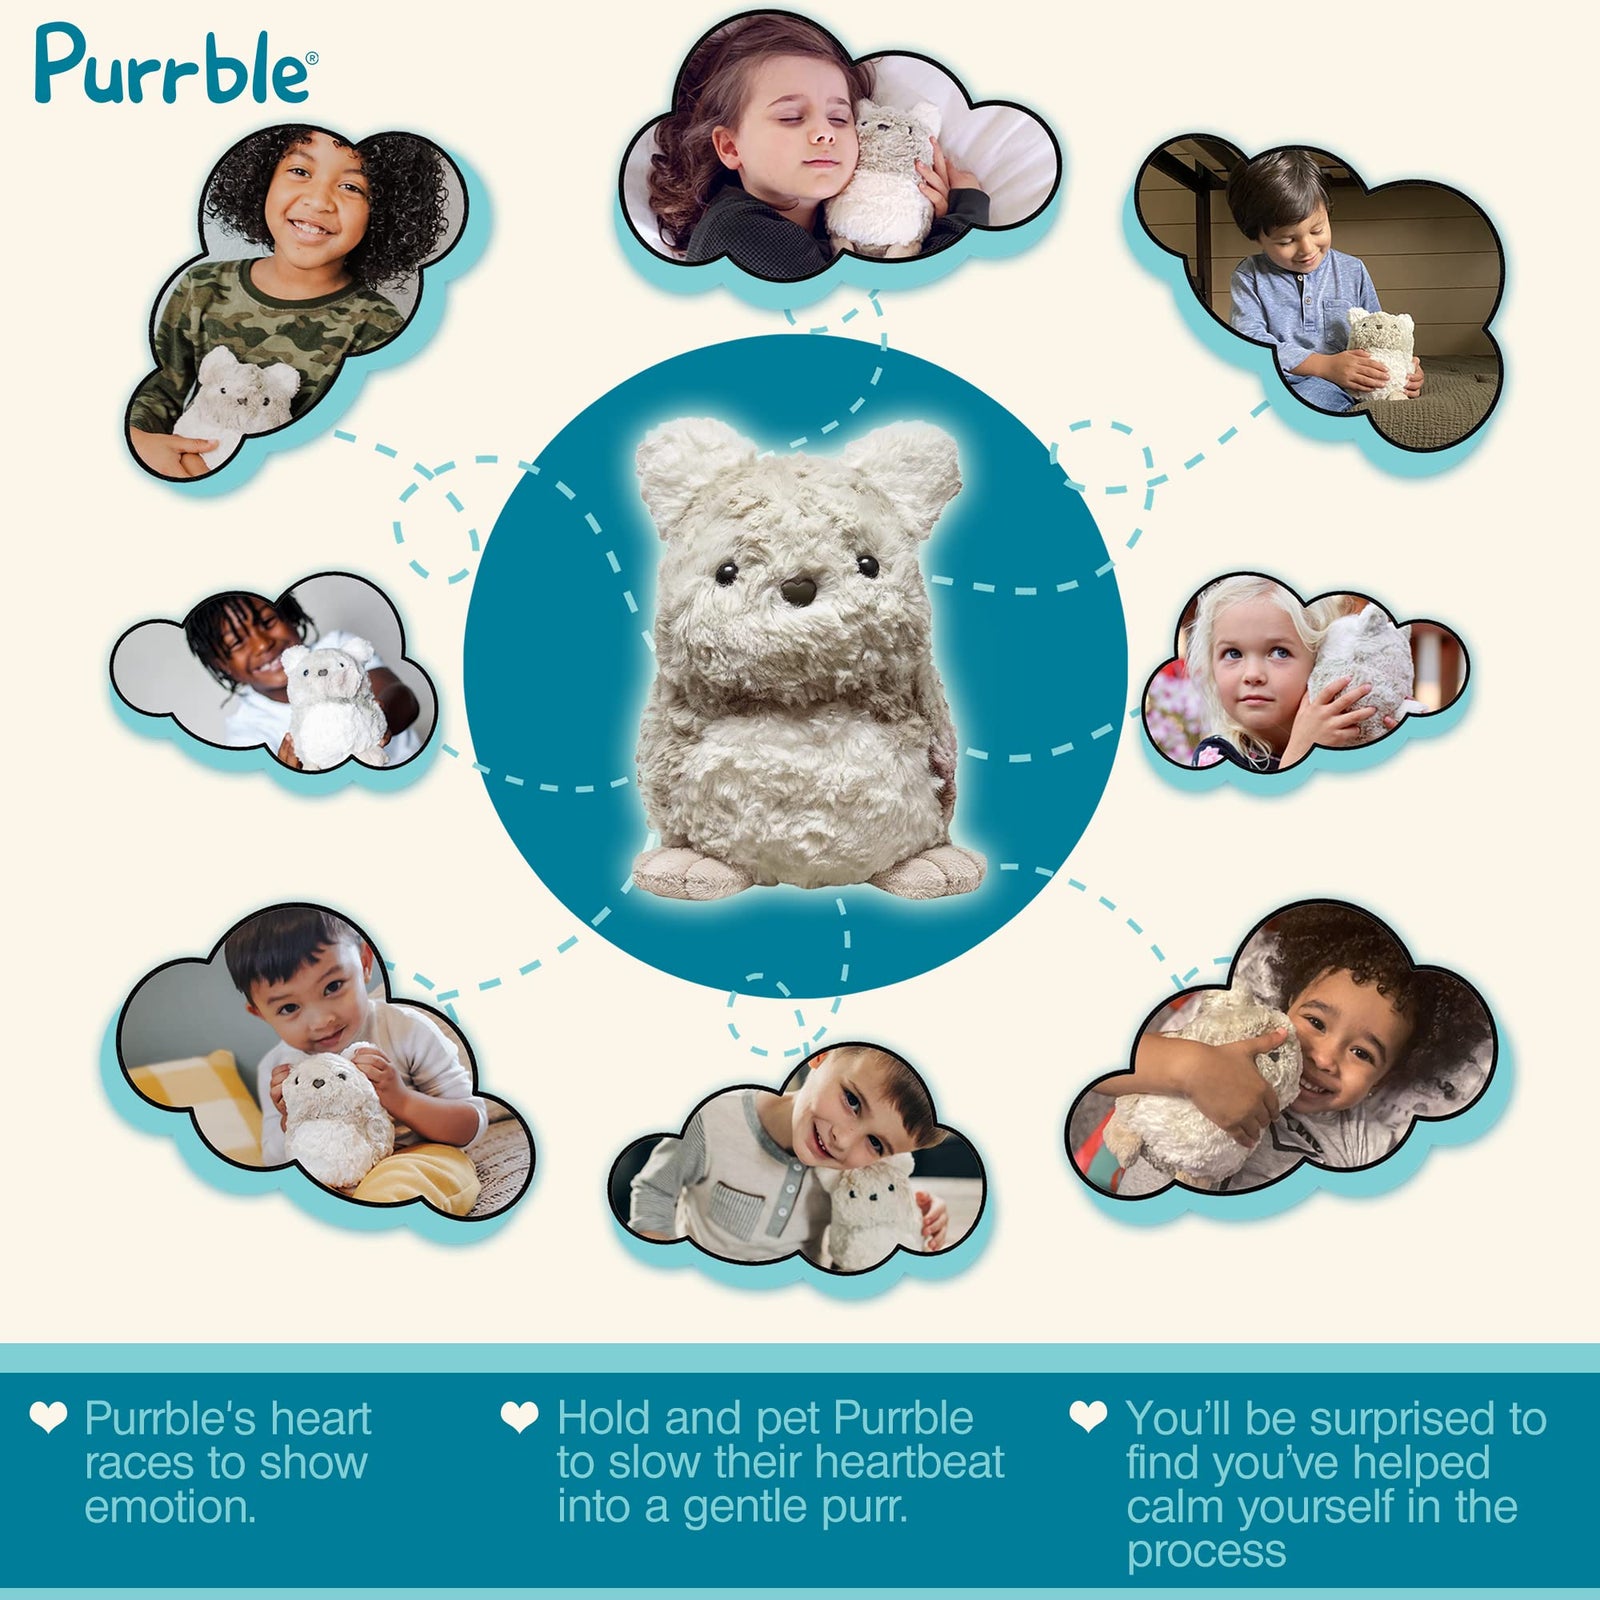 Purrble - Calming Toy Companion with Dynamic Heartbeat and Soothing Purr - Interactive Plush Companion for All Ages - Stuffed Animal Doll for Emotion Regulation - Cuddle and Pet Plushies